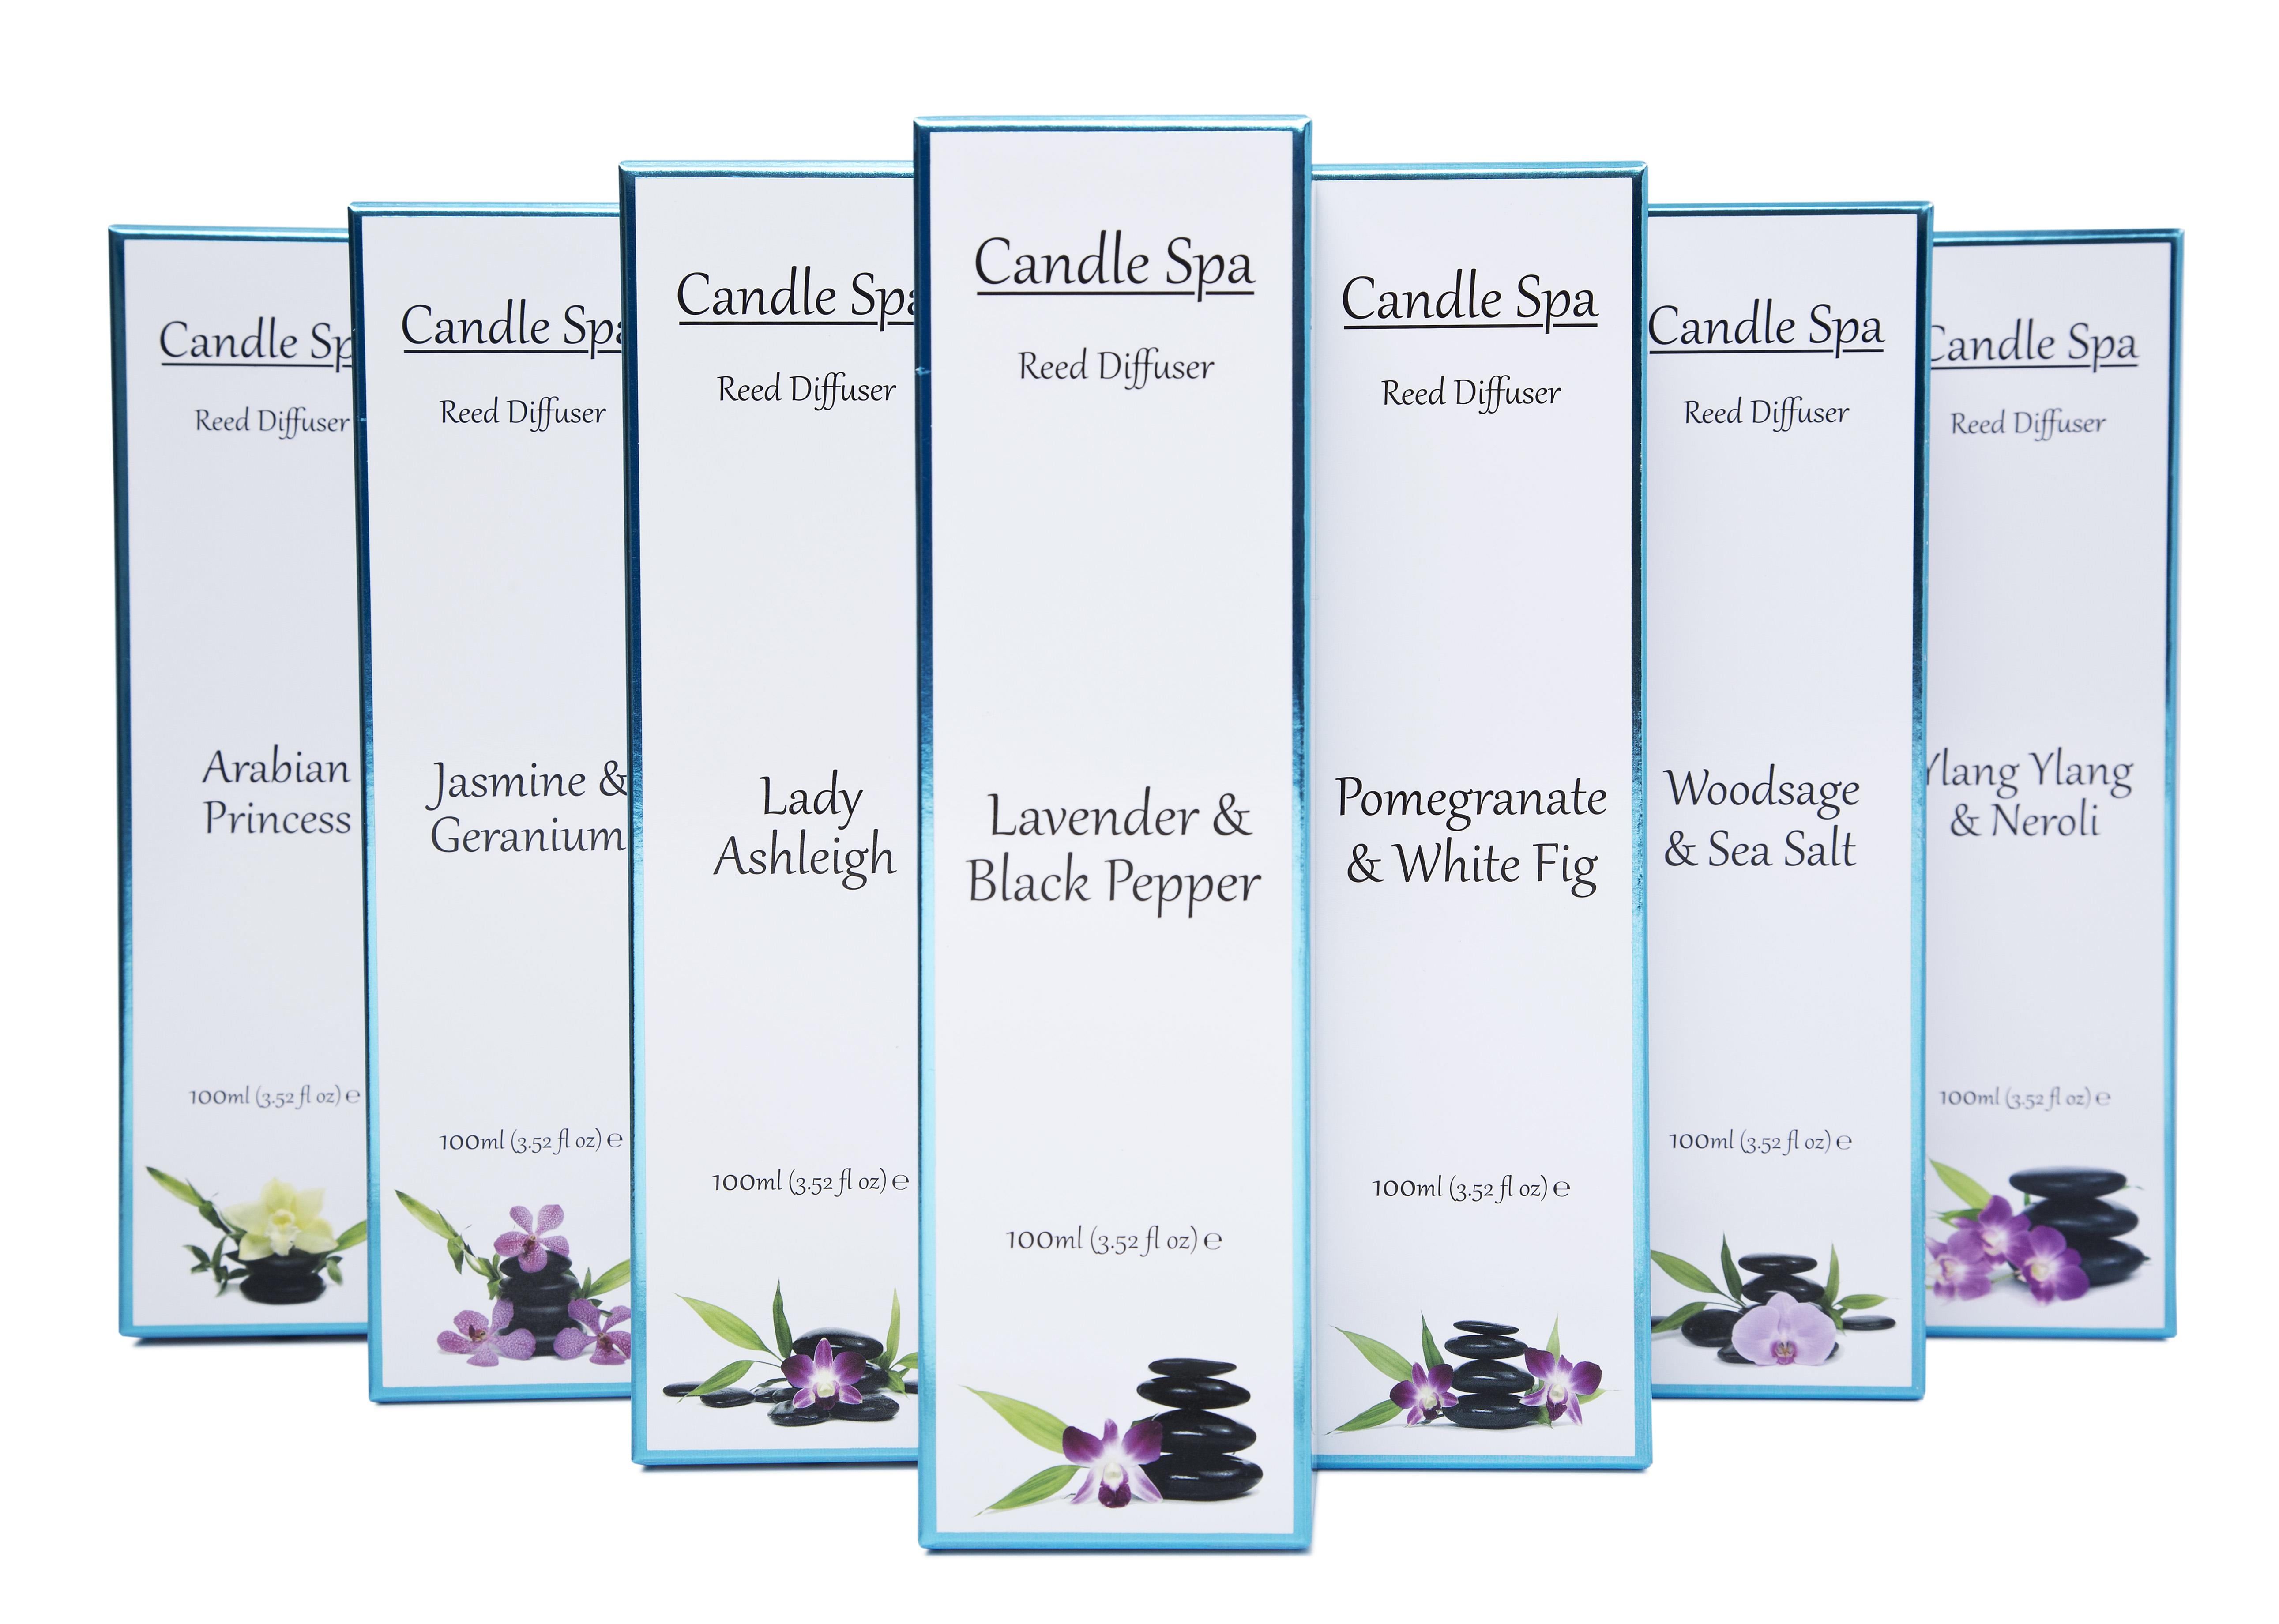 Candle Spa Reed Diffusers